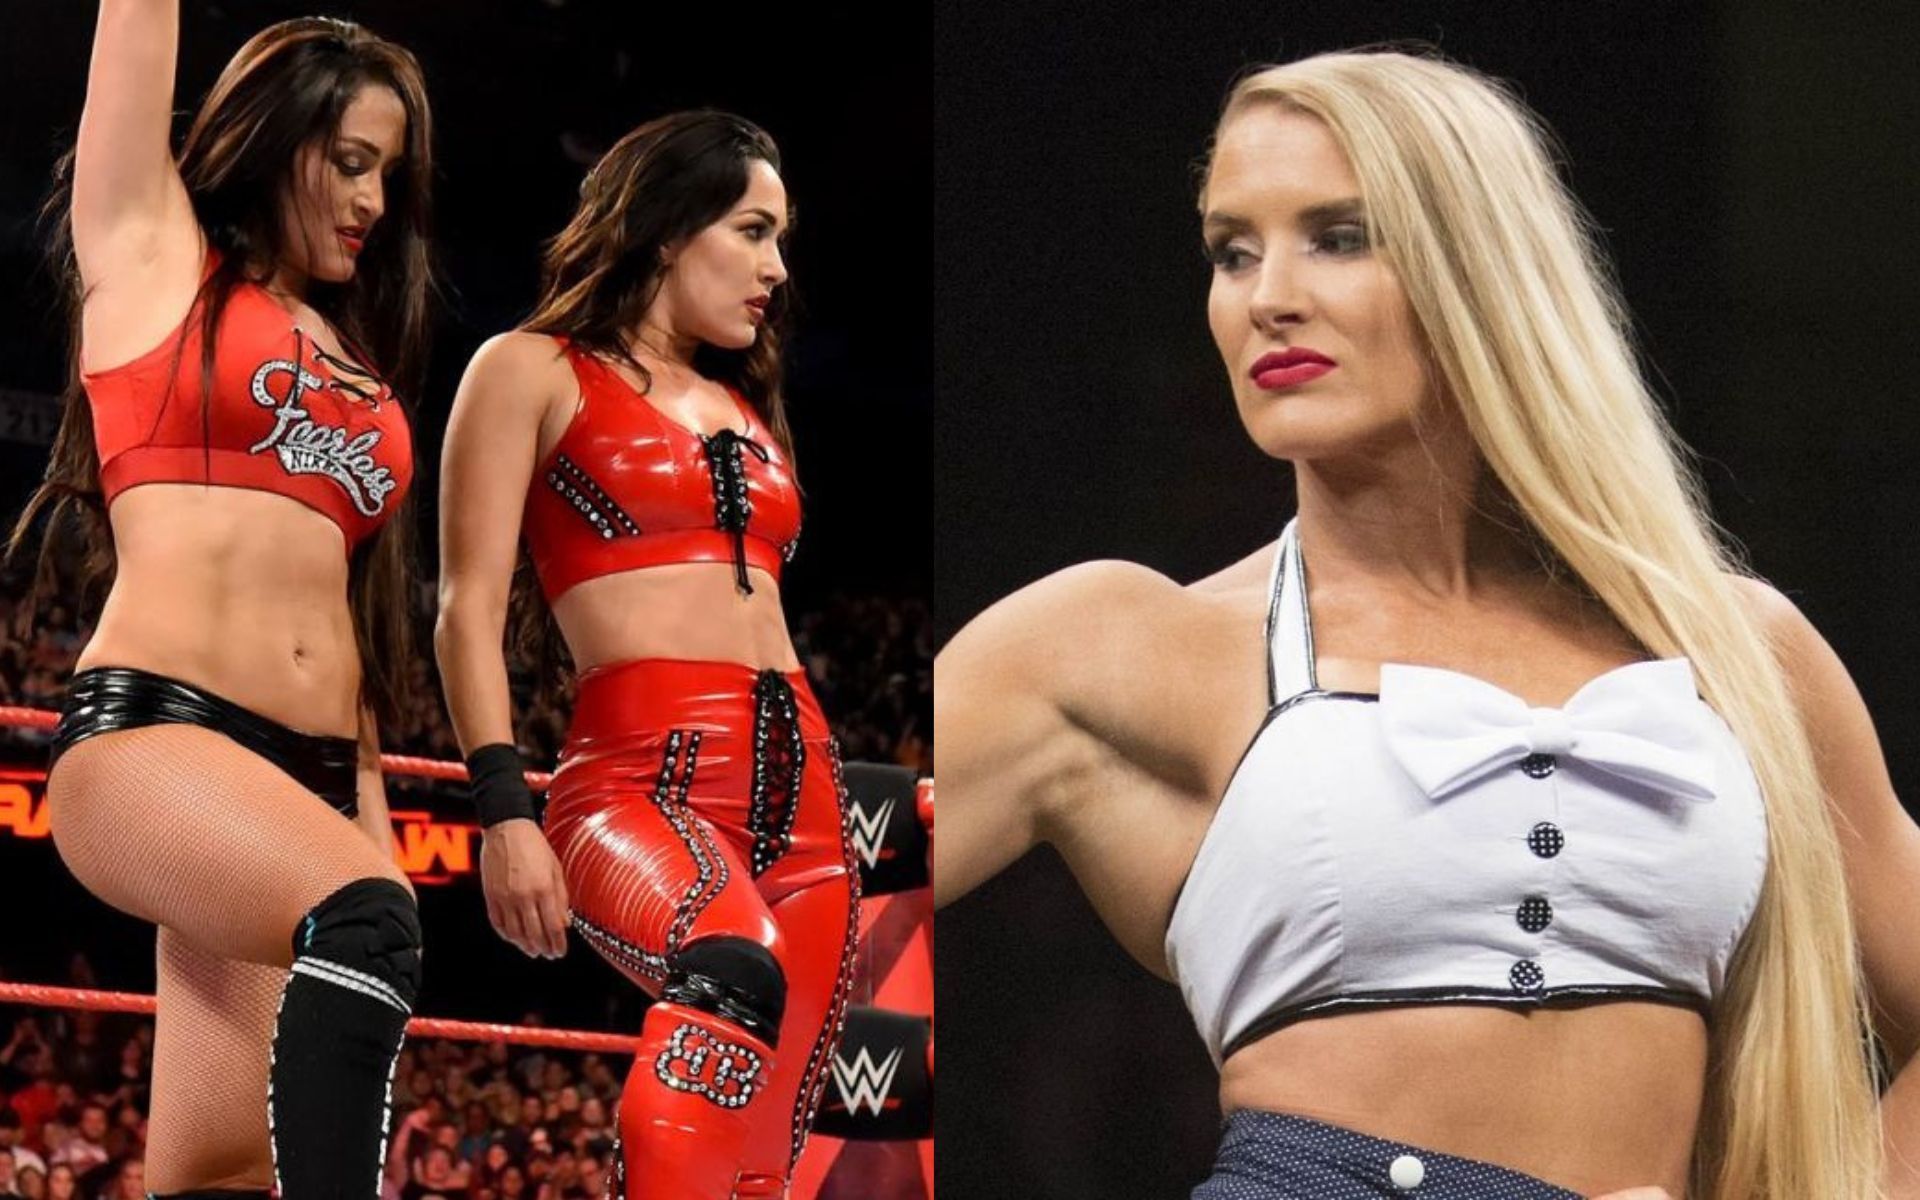 WWE Hall of Famers, The Bella Twins, and WWE Superstar, Lacey Evans